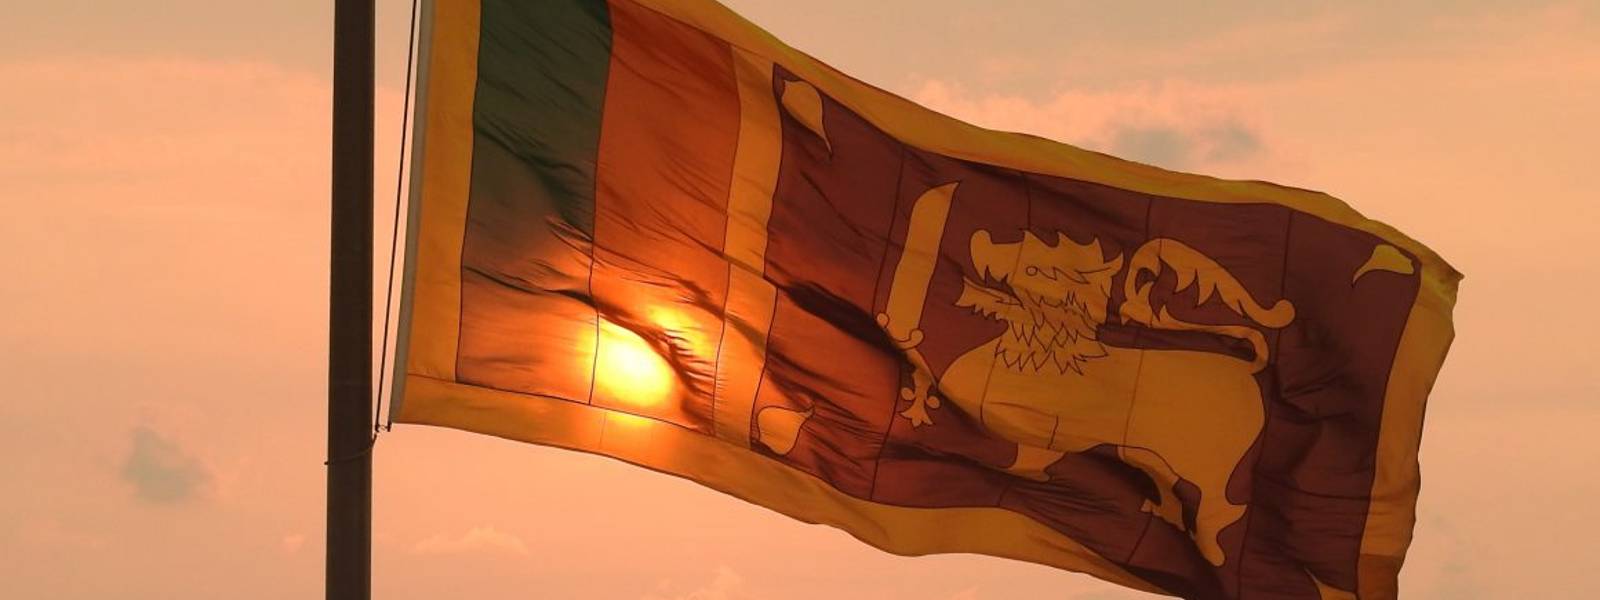 Sri Lanka’s President and PM issues statements to mark the 75th Independence Day